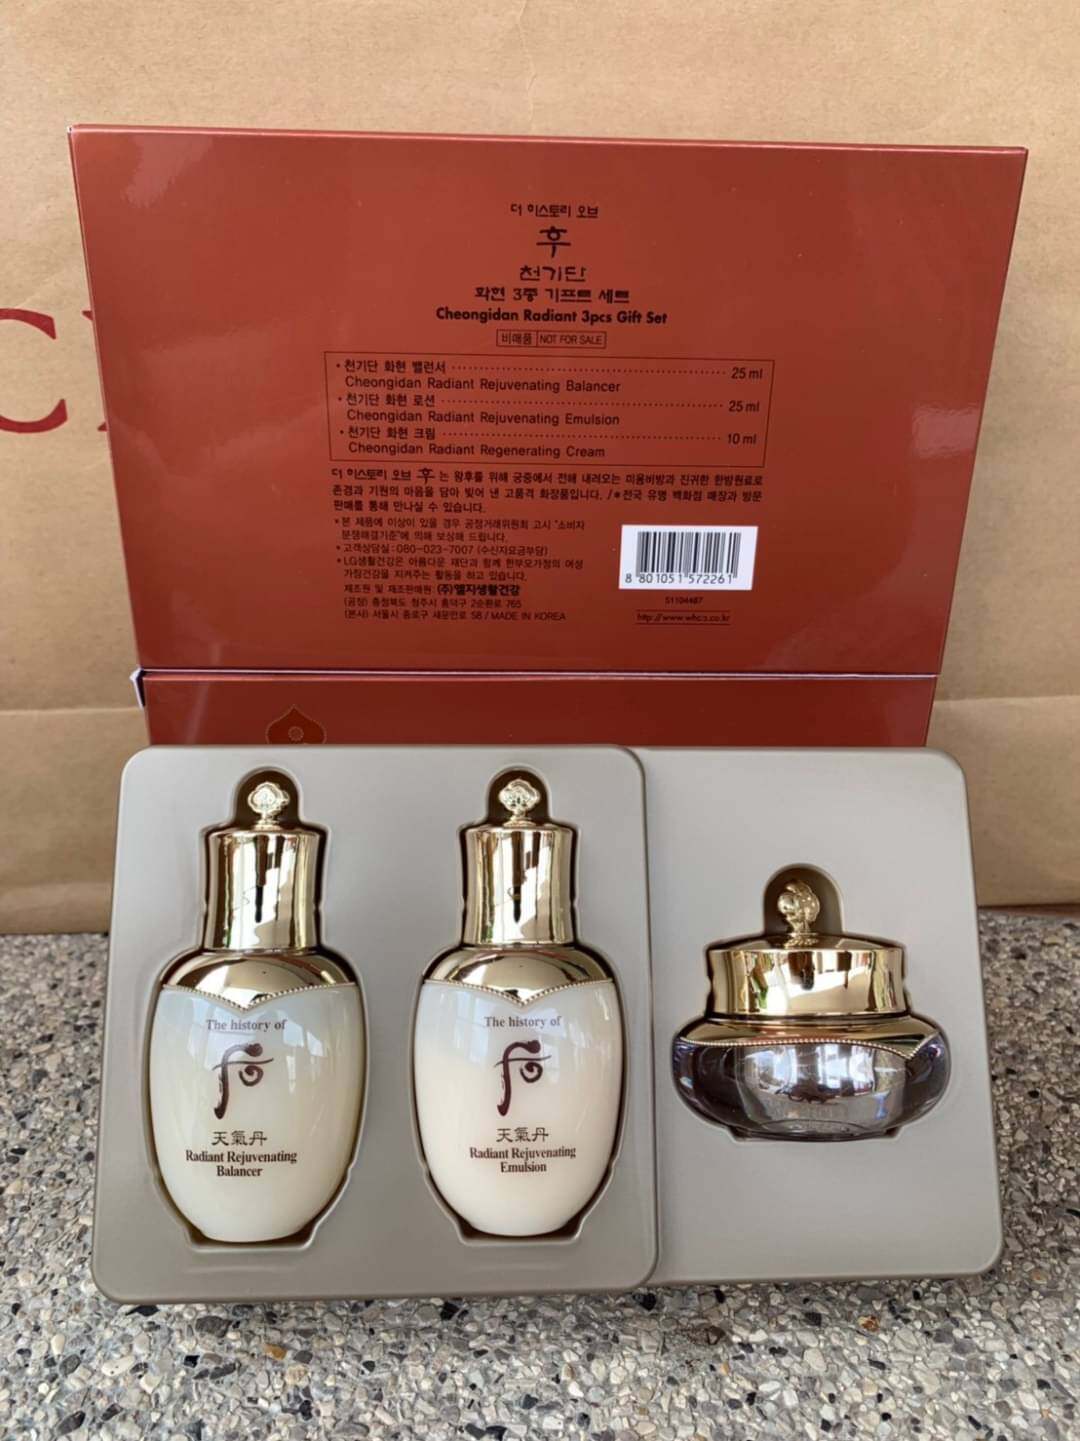 ͻ شԵѳż˹ The history of whoo ͹Ź | lazada.co.th